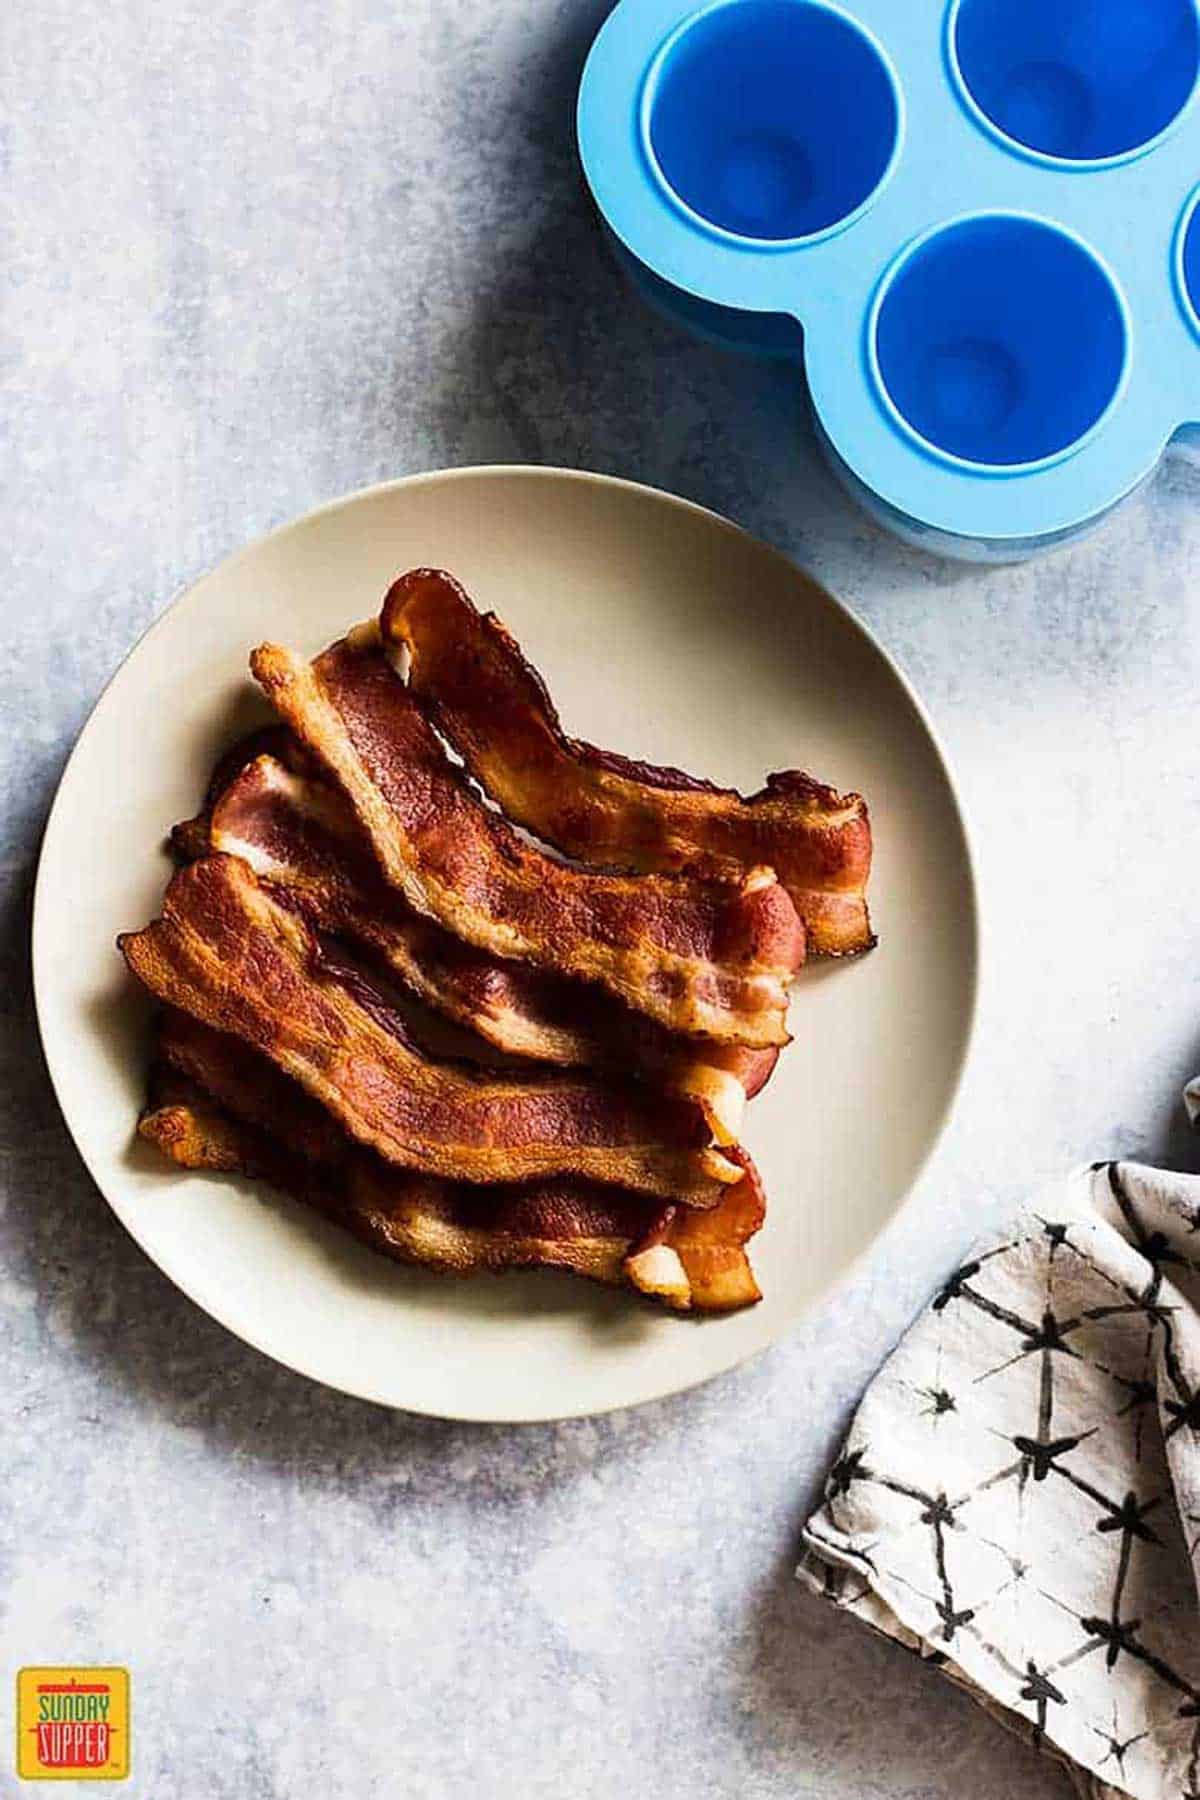 cooked bacon on a plate for starbucks egg bites